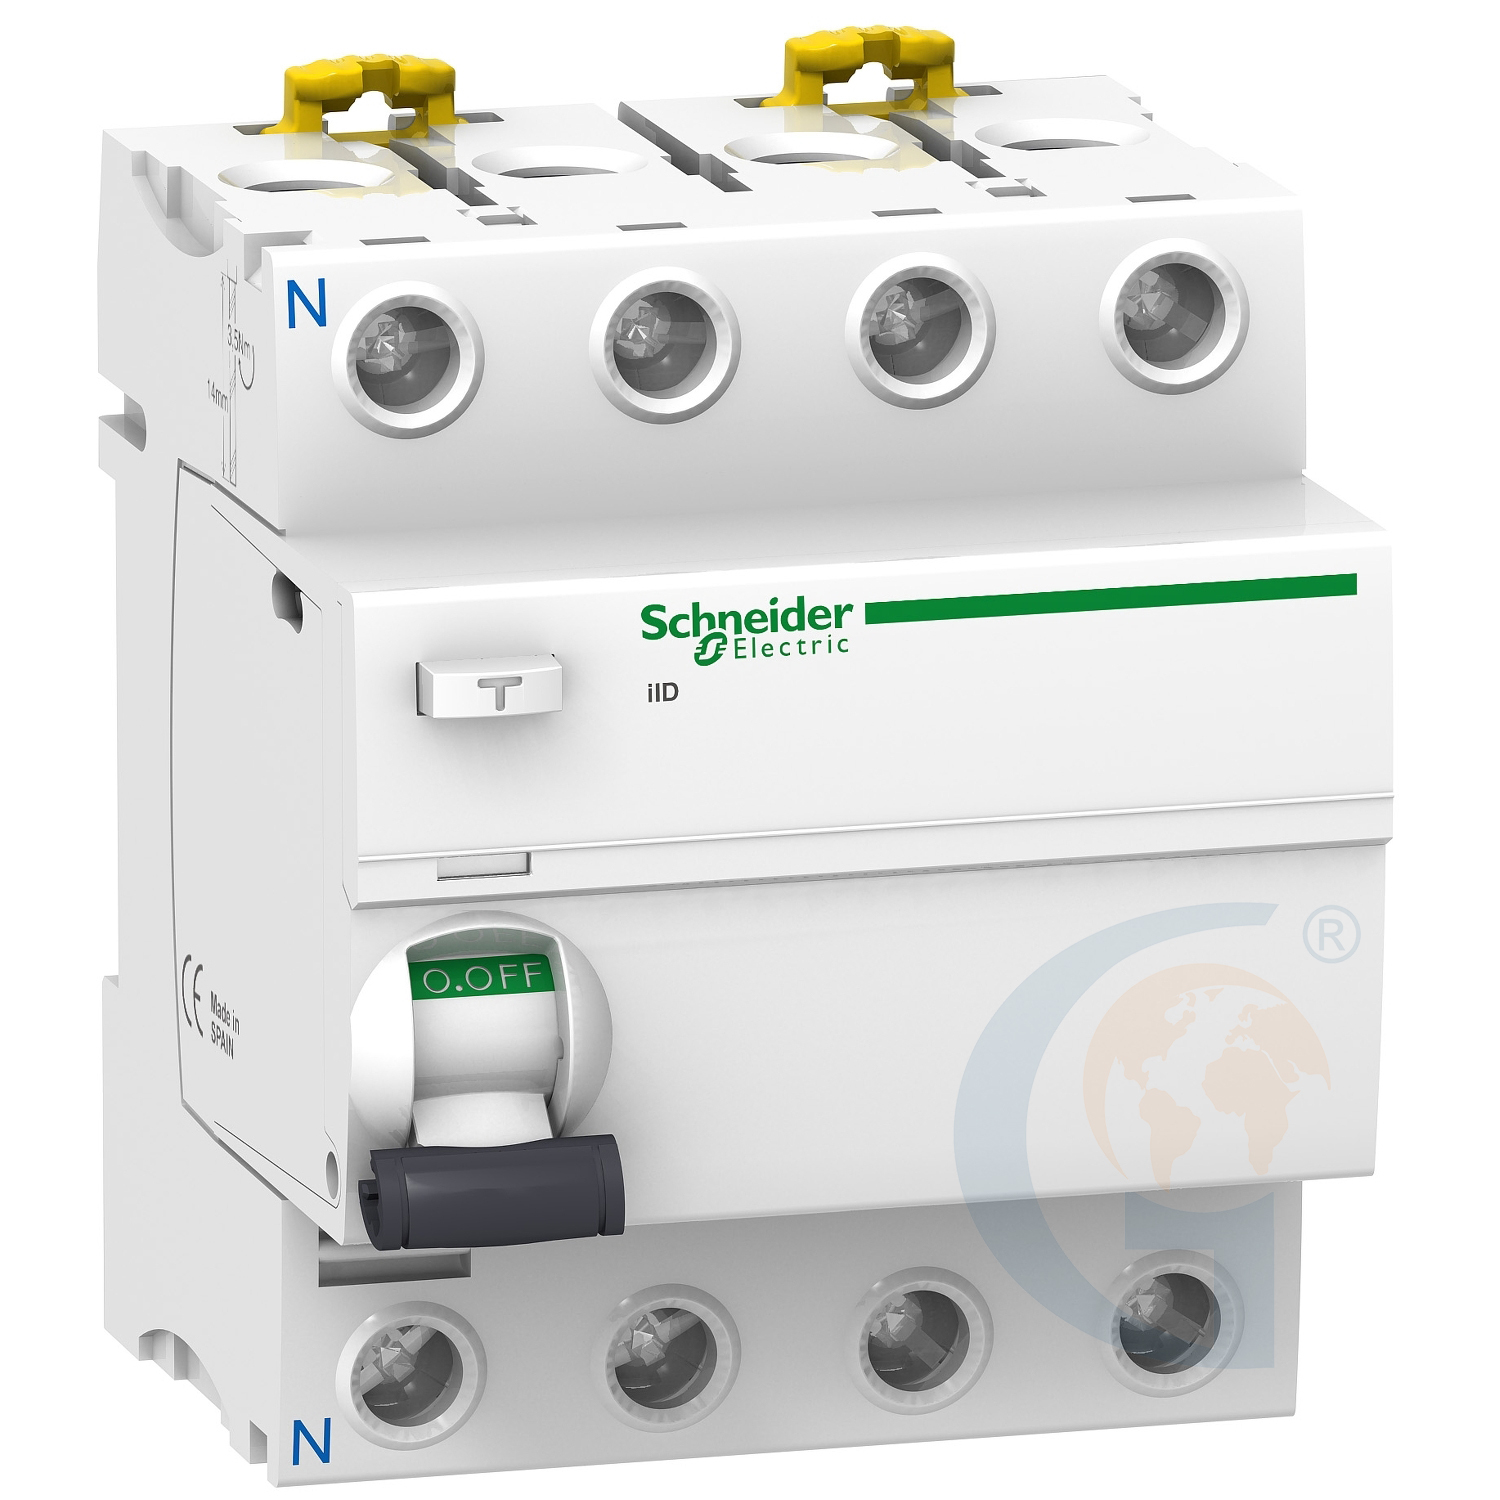 Schneider Electric A9R31463 ACTI 9 IID – RCCB – 4P – 63A – 30MA – TYPE A-SI https://gesrepair.com/wp-content/uploads/2020/Schneider/Schneider_Electric_A9R31463_.jpg